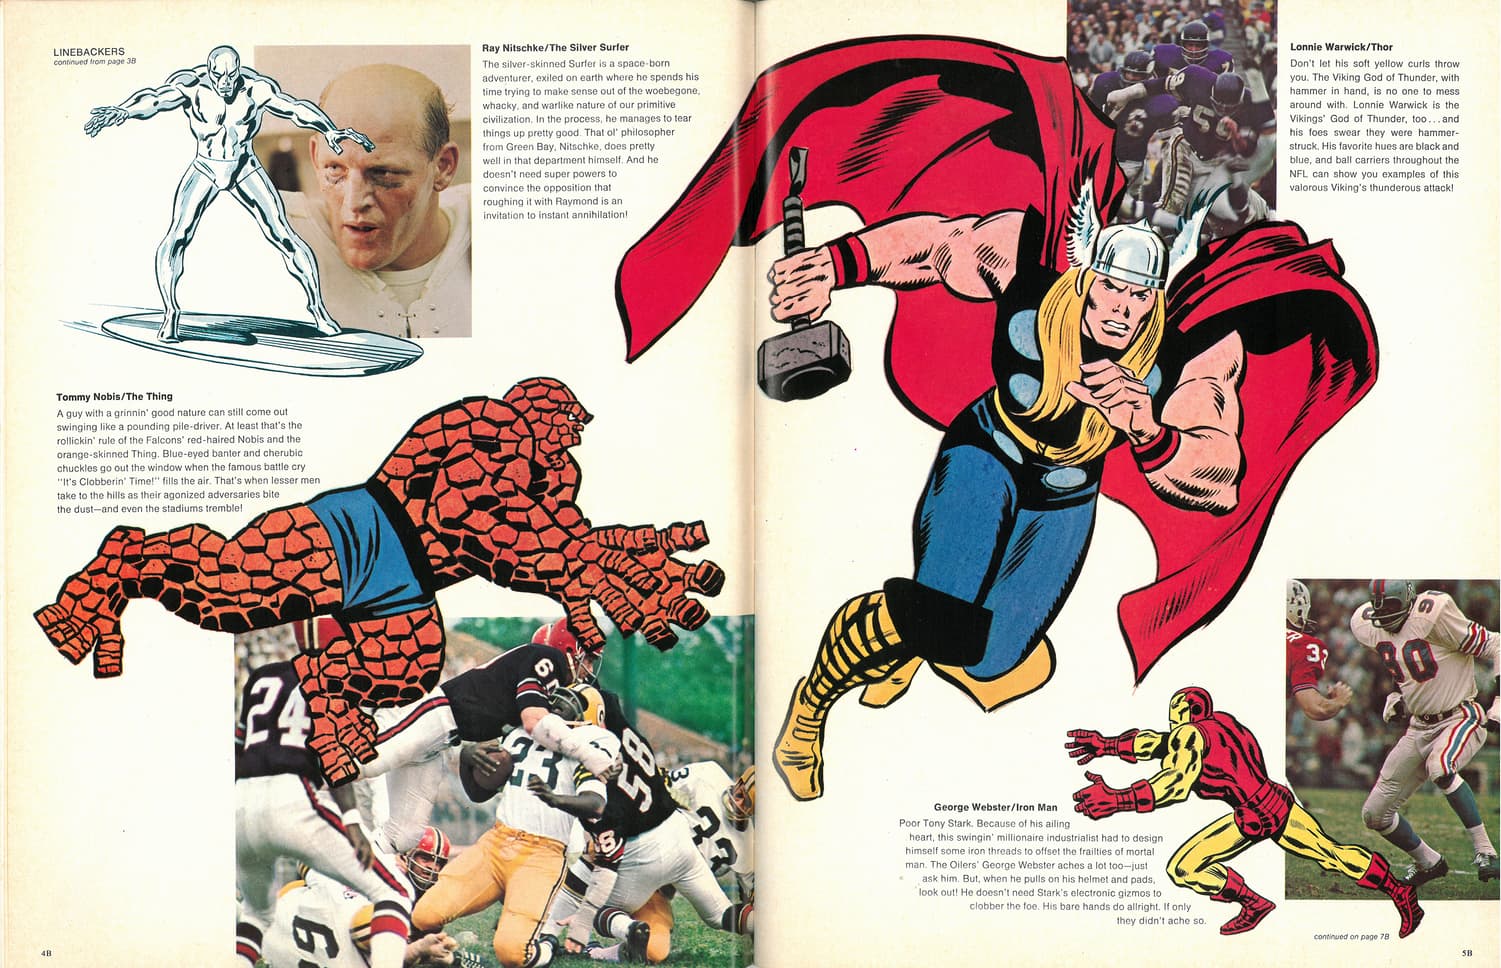 Marvel x NFL - Silver Surfer, Thing, Thor and Iron Man